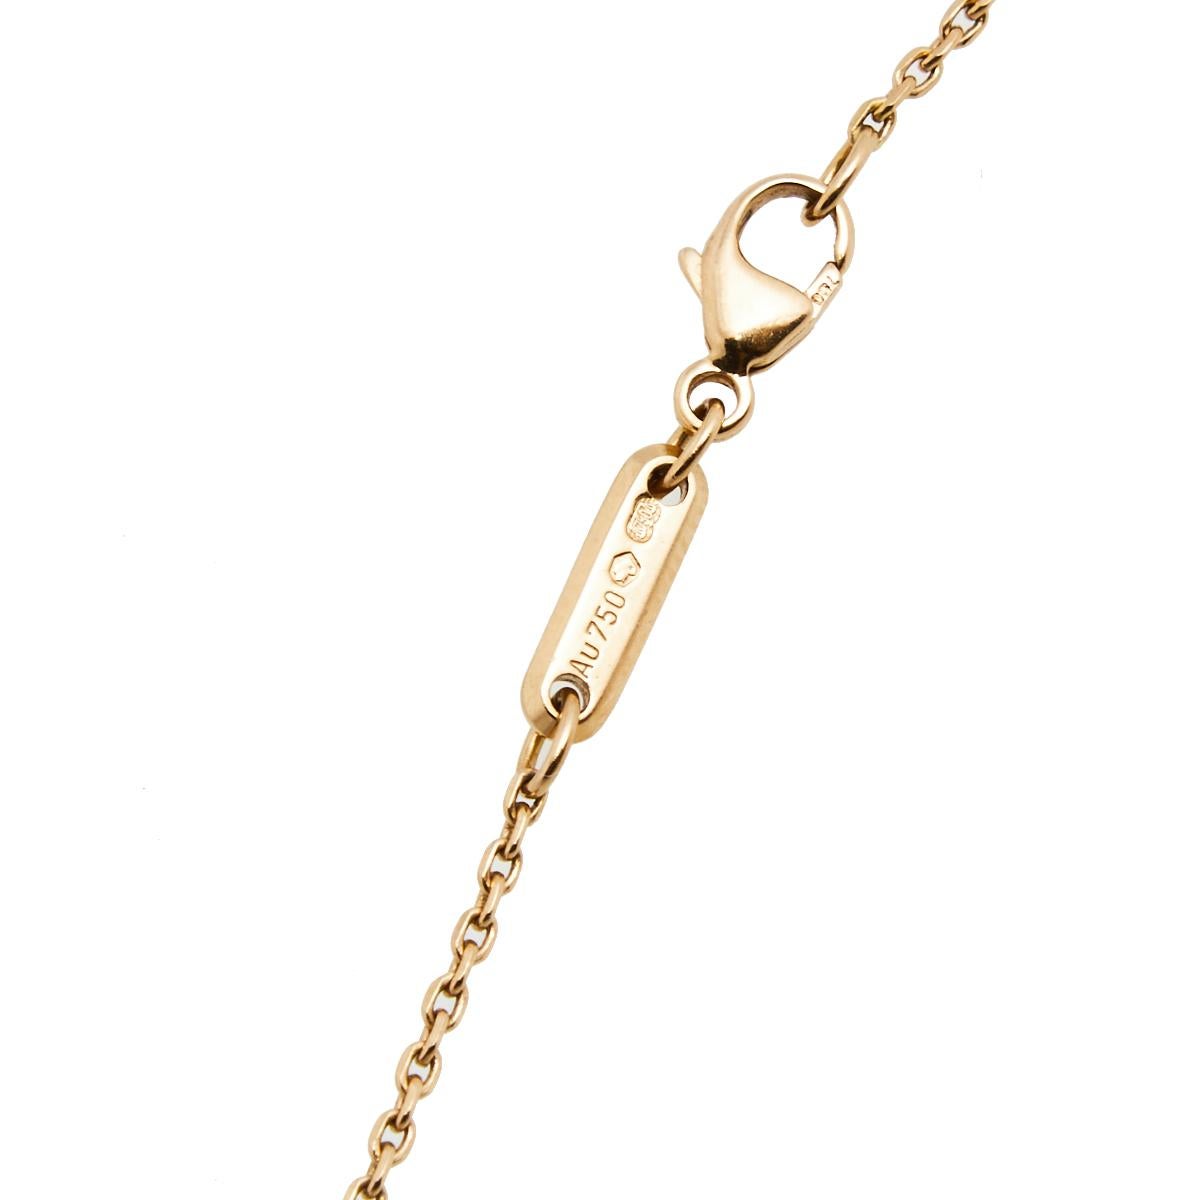 The house of Chopard presents an elegant and graceful necklace from their popular Happy Diamonds collection. It has an 18k rose gold chain with a pendant featuring an assembly of overlapping circles. One of the circles has a bezel lined with